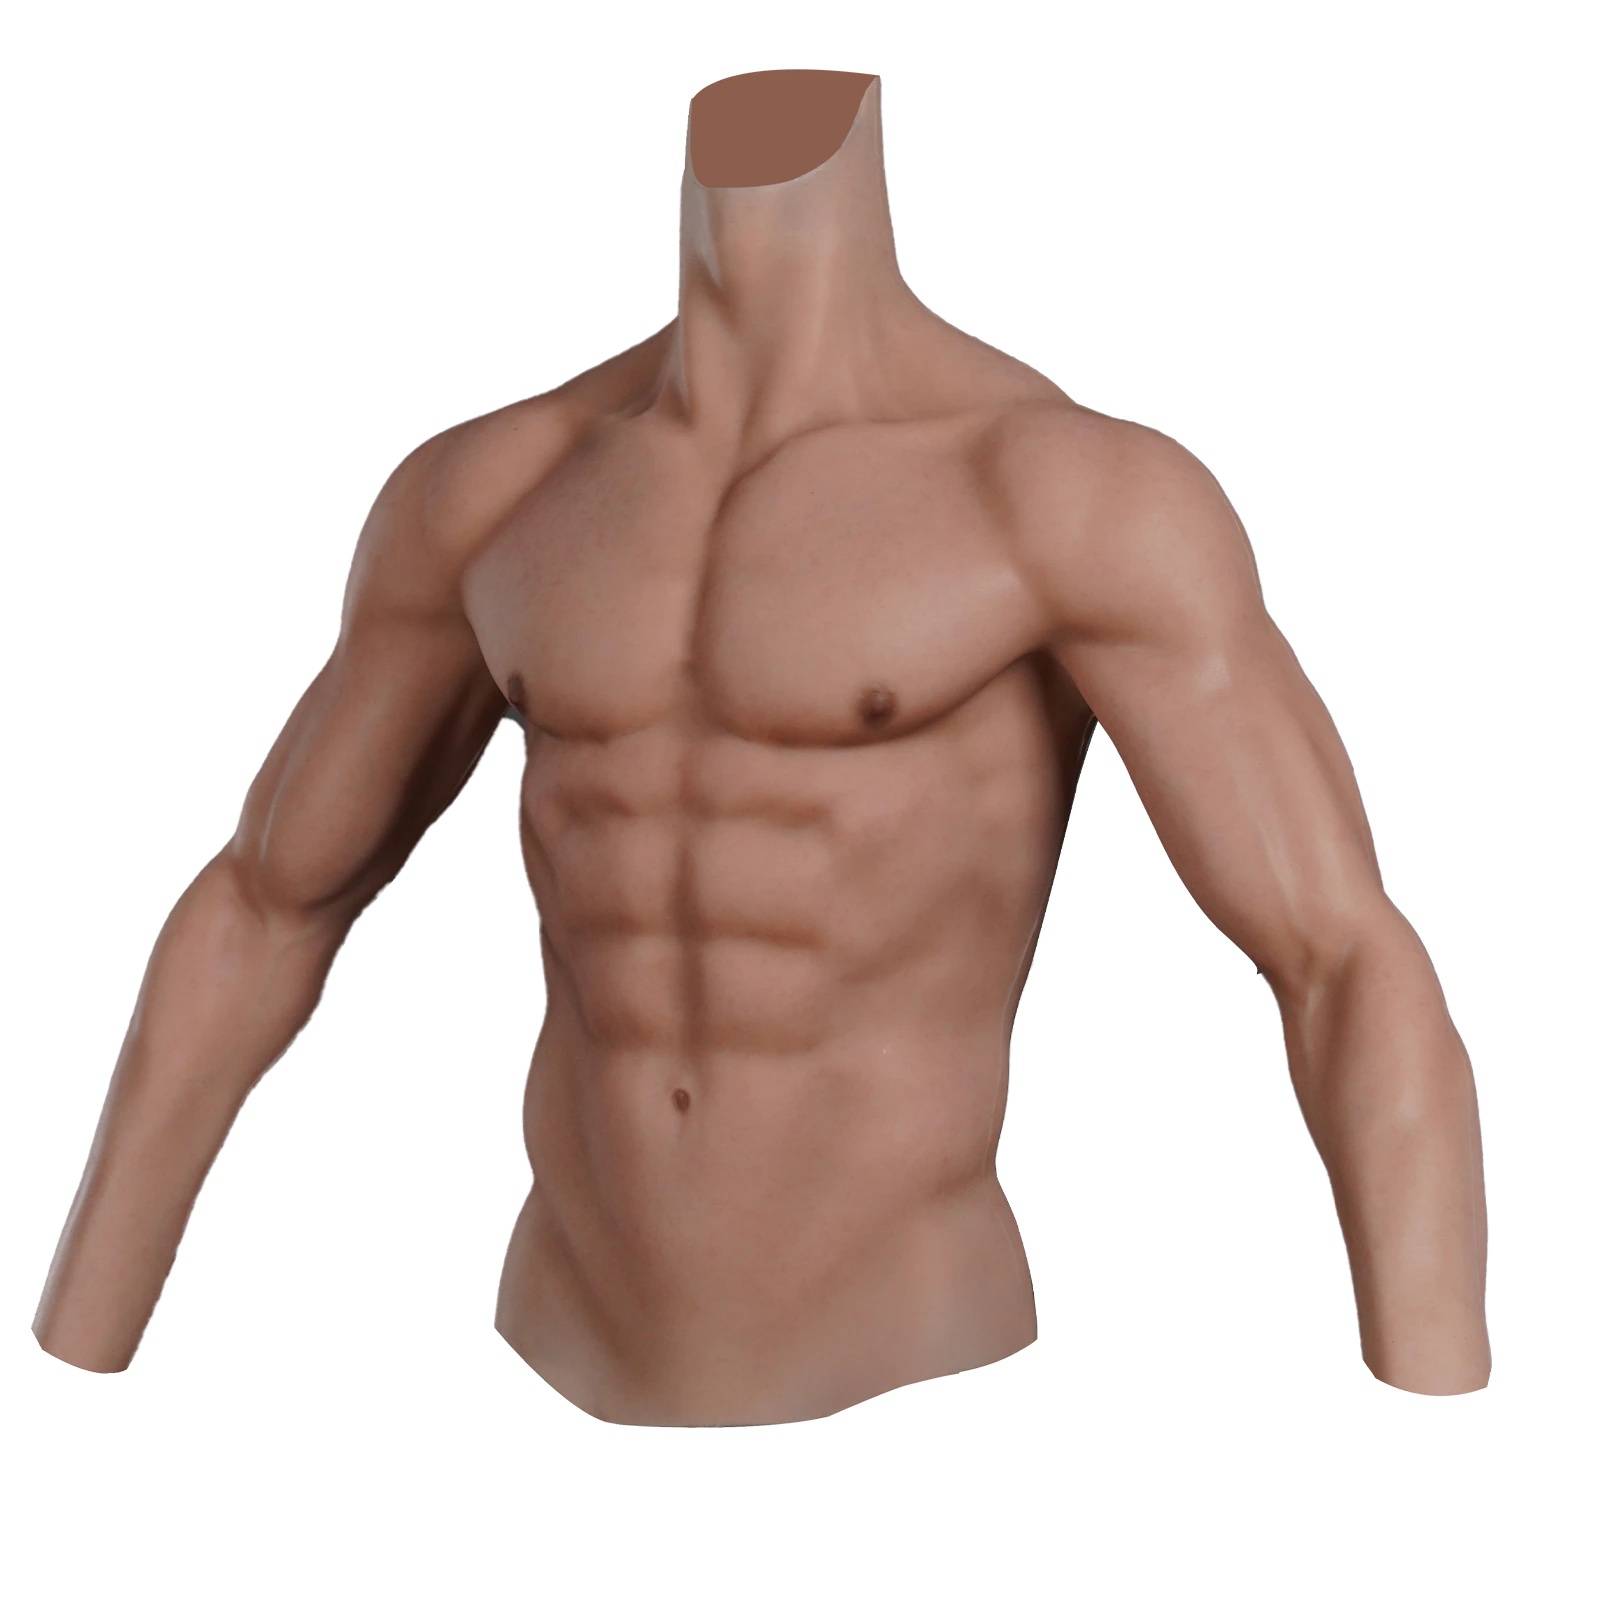 Realistic Male Chest - 599.00 with free shipping on Gays+ Store 